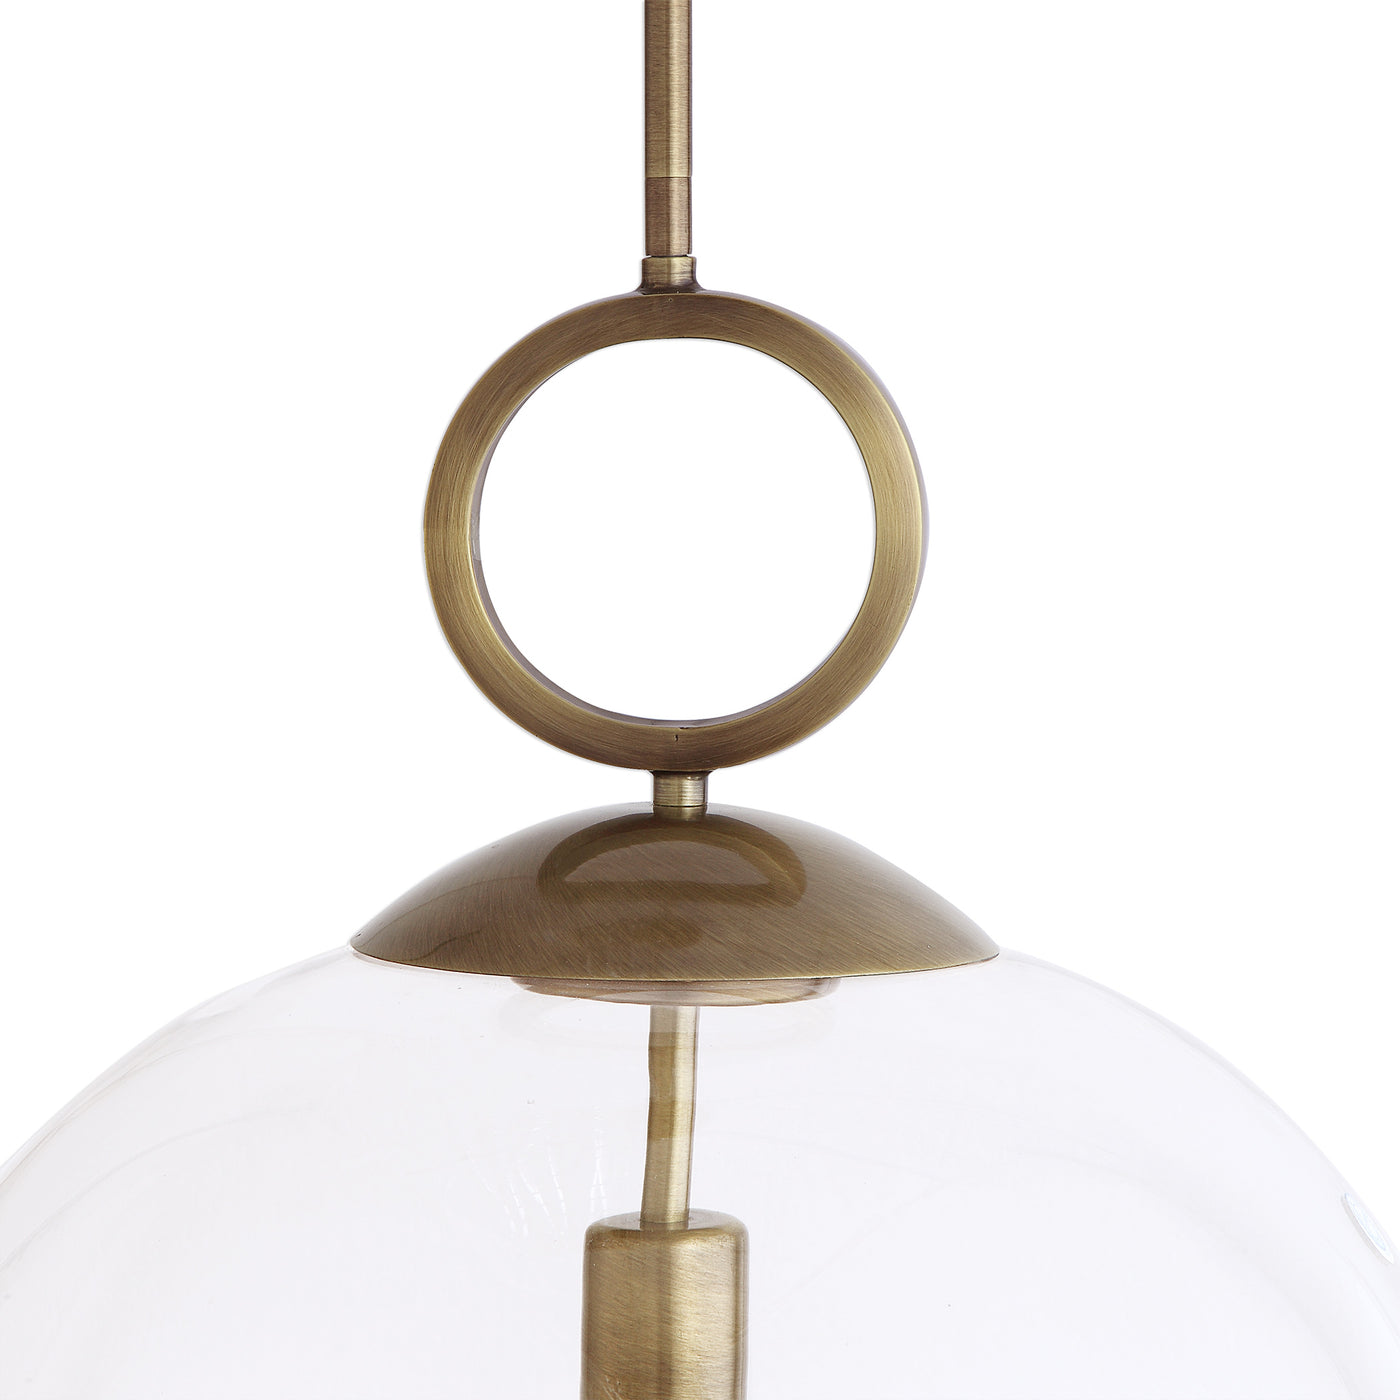 Simple Elegance Best Describes The Extra-large Clear Blown Glass On This Transitional Pendant. Calix Features An Aged Bras...